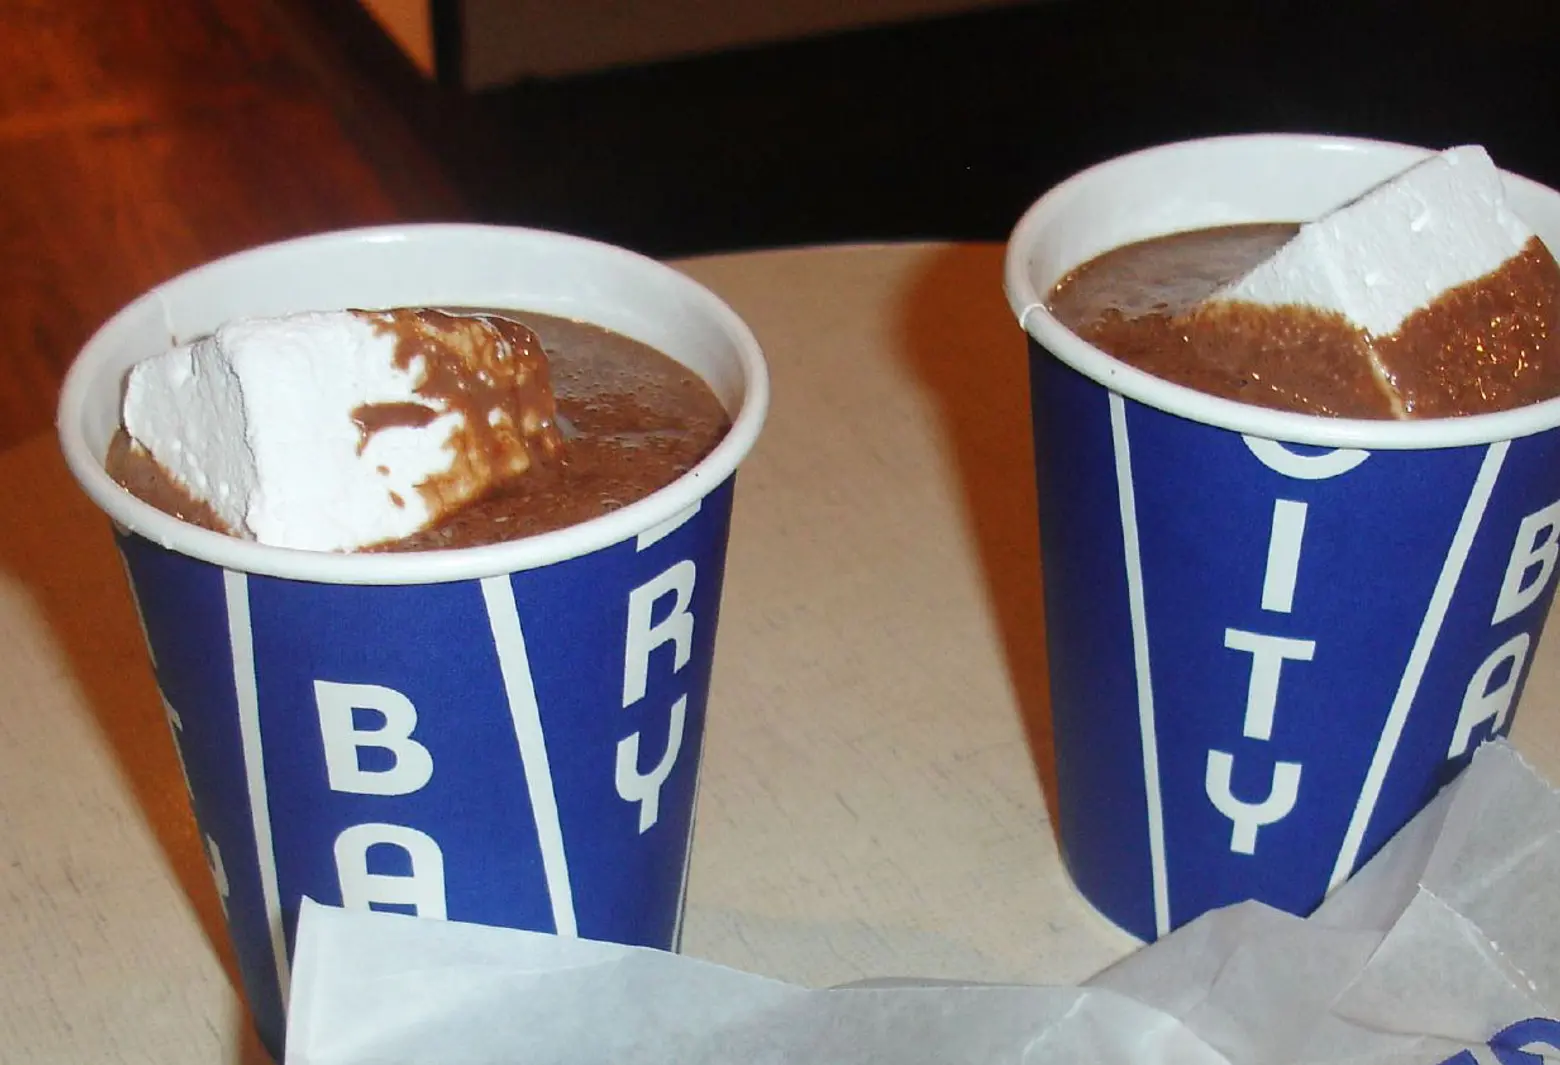 After City Bakery closure, founder will host hot chocolate pop-ups